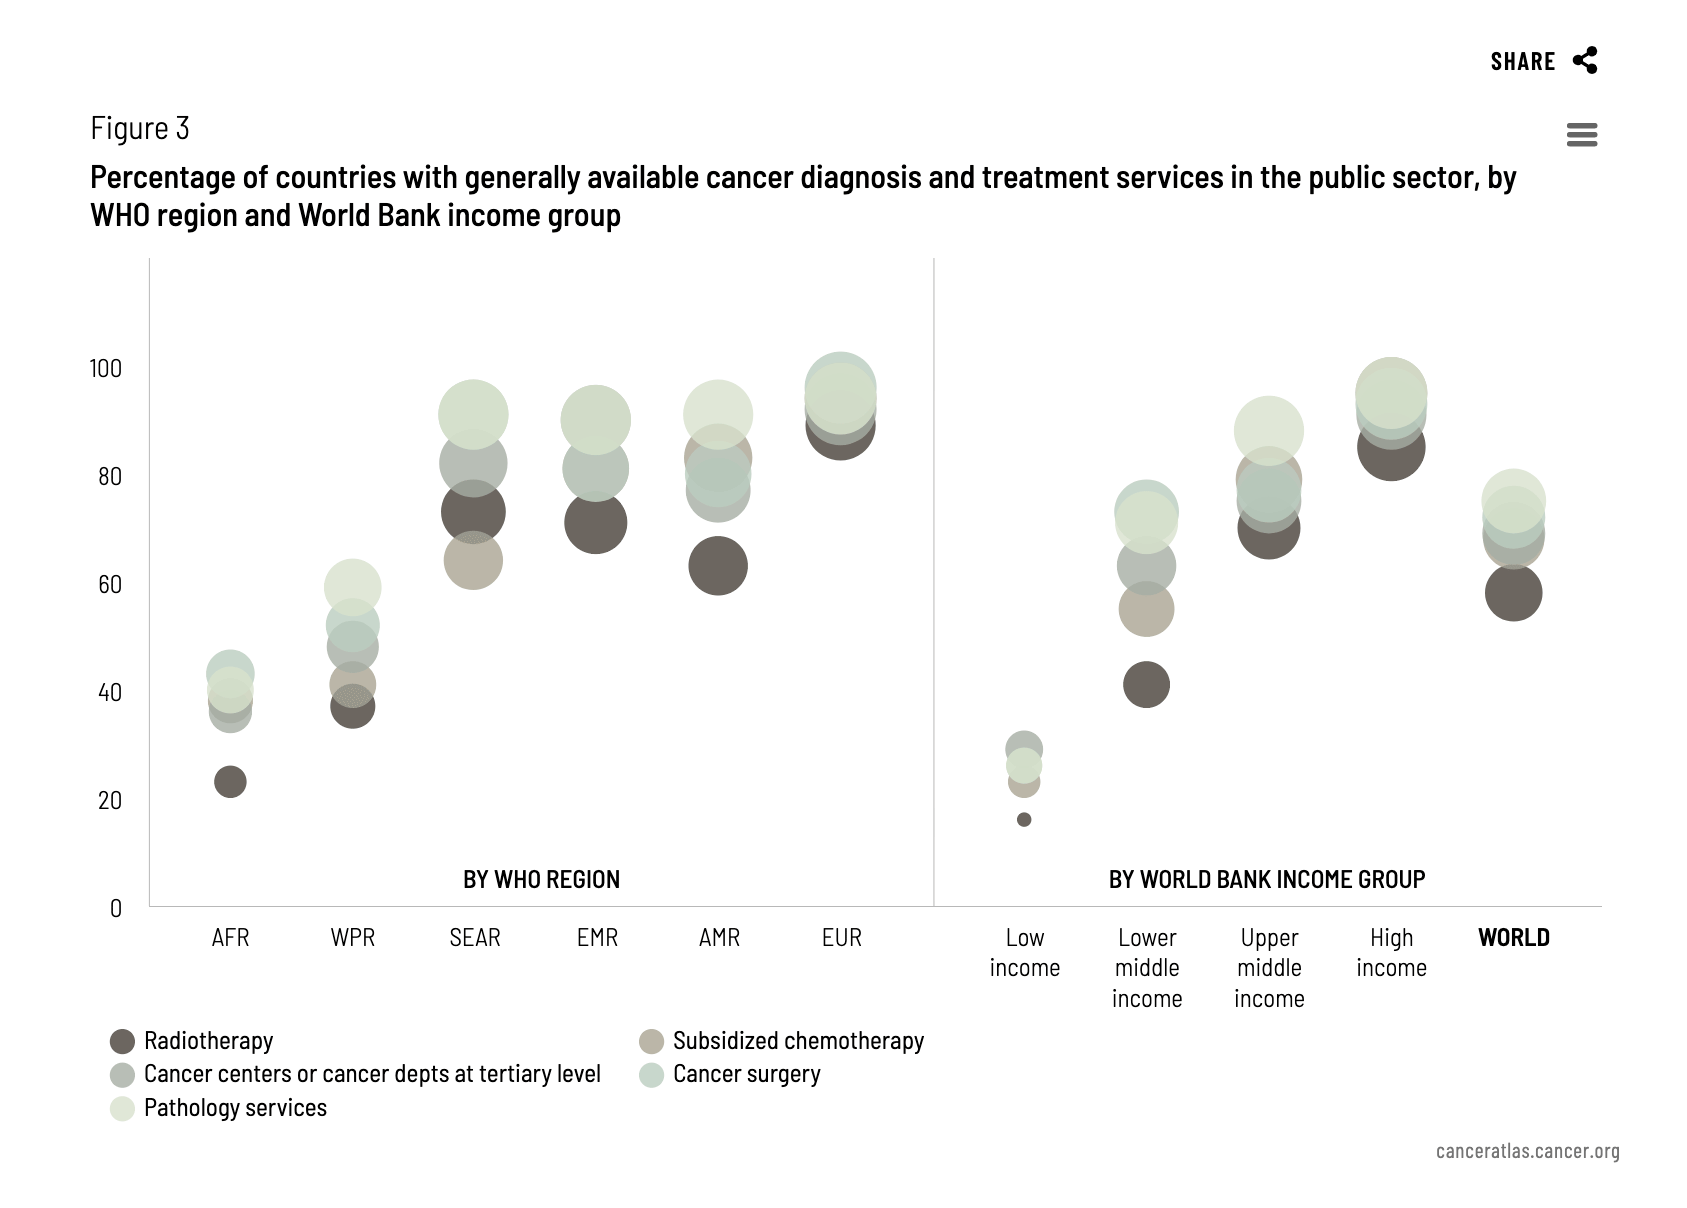 Cancer Atlas chart. Headline reads Percentage of countries with generally available cancer diagnosis and treatment in the public sector, by WHO region and World Bank income group